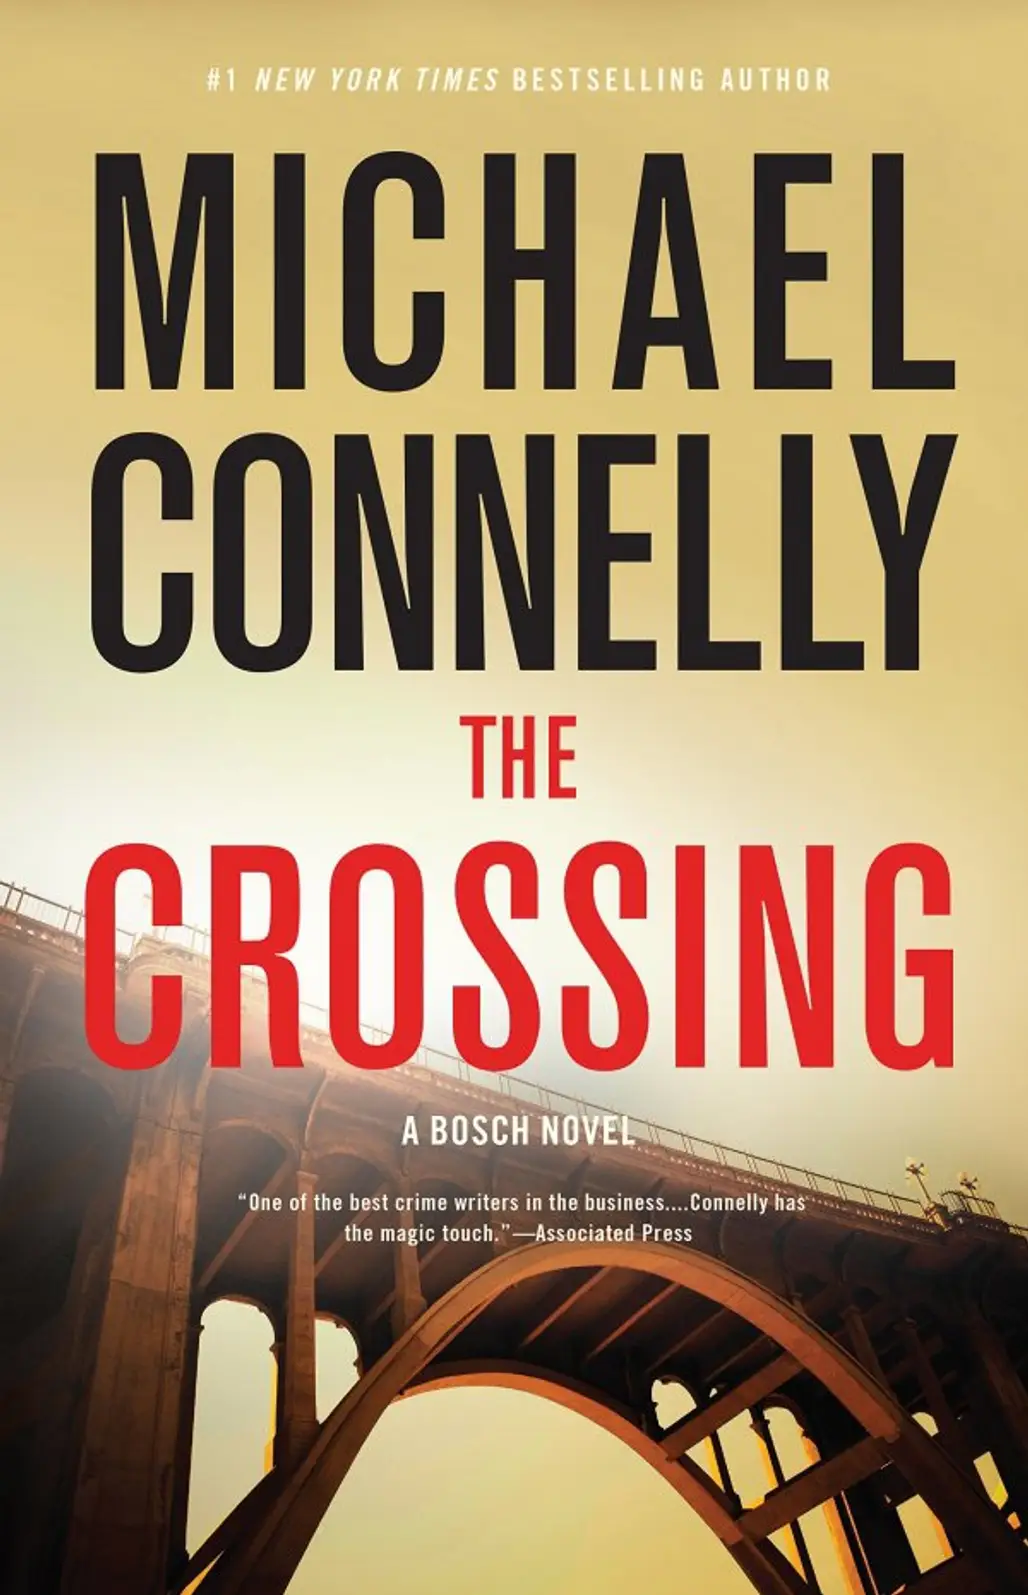 The CROSSING by Michael Connelly